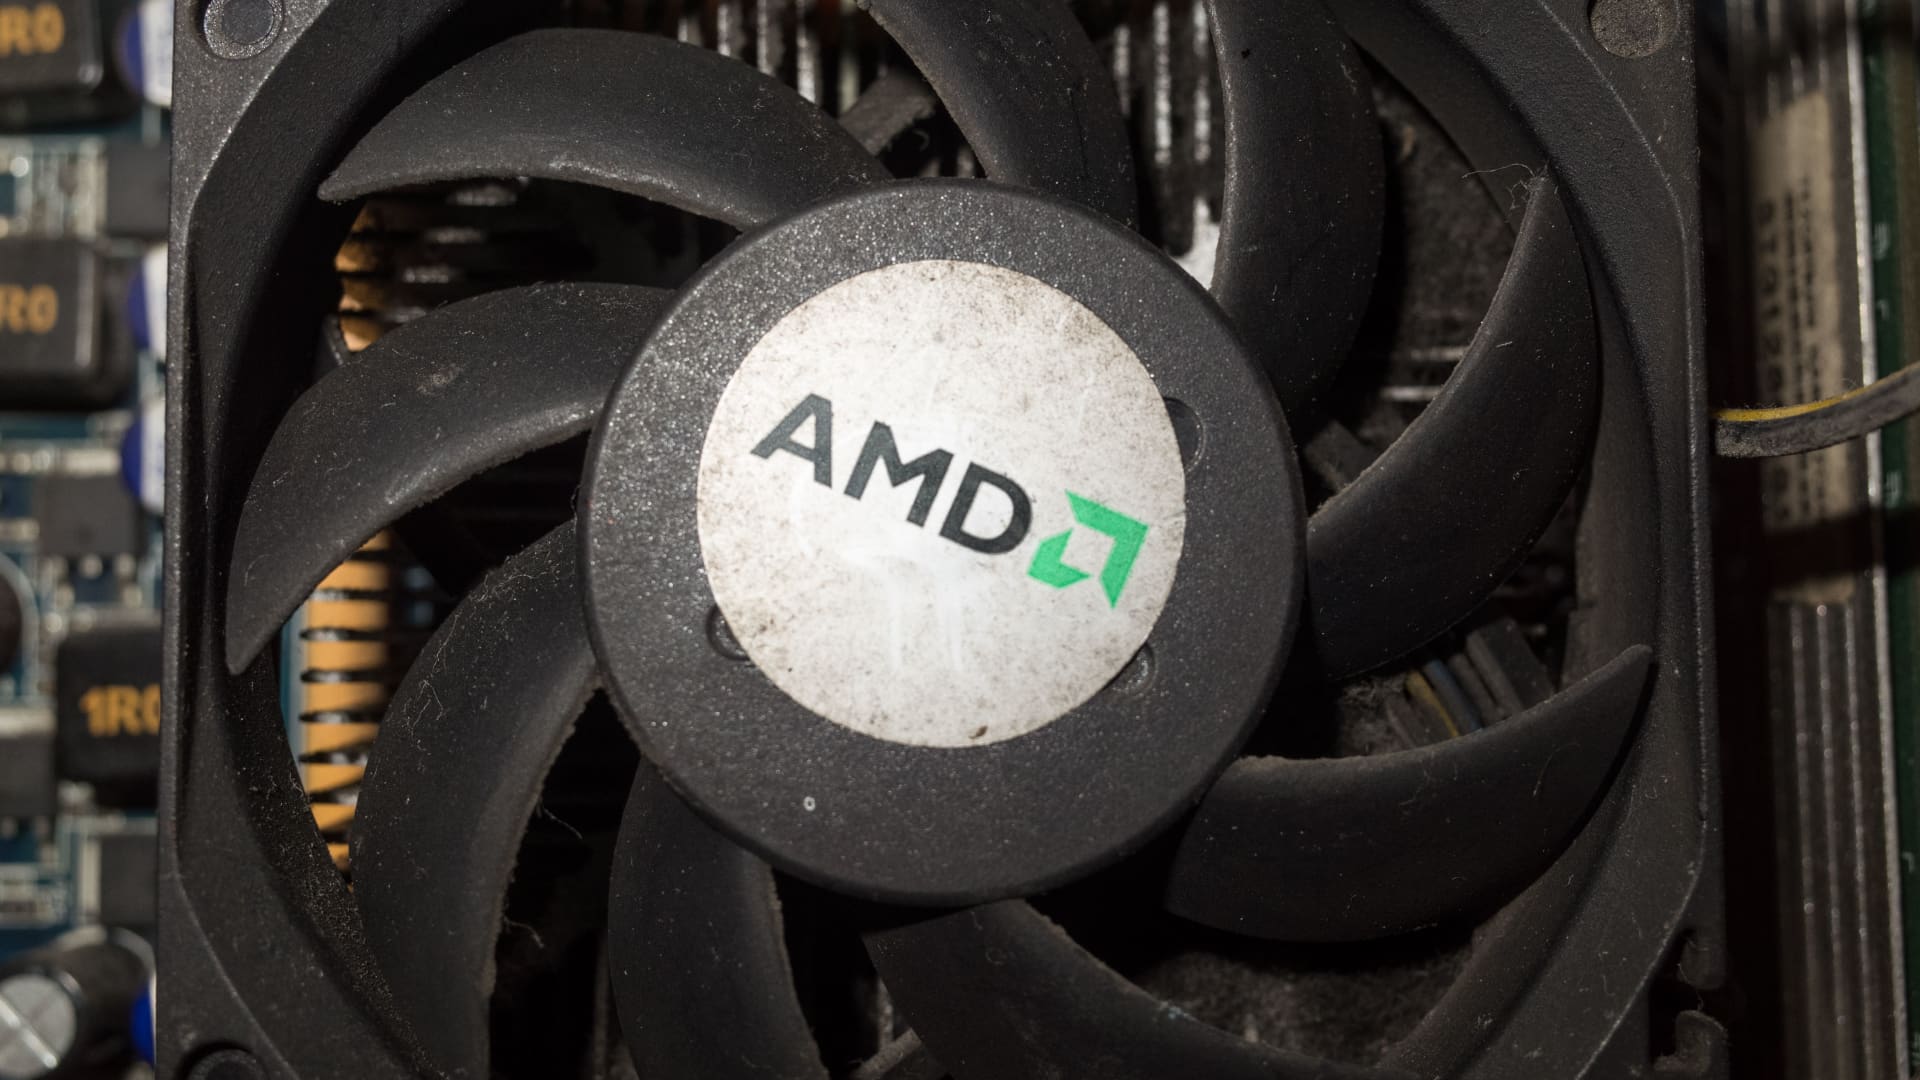 AMD can ride the A.I. wave to take a greater market share from rivals, Bank of America says